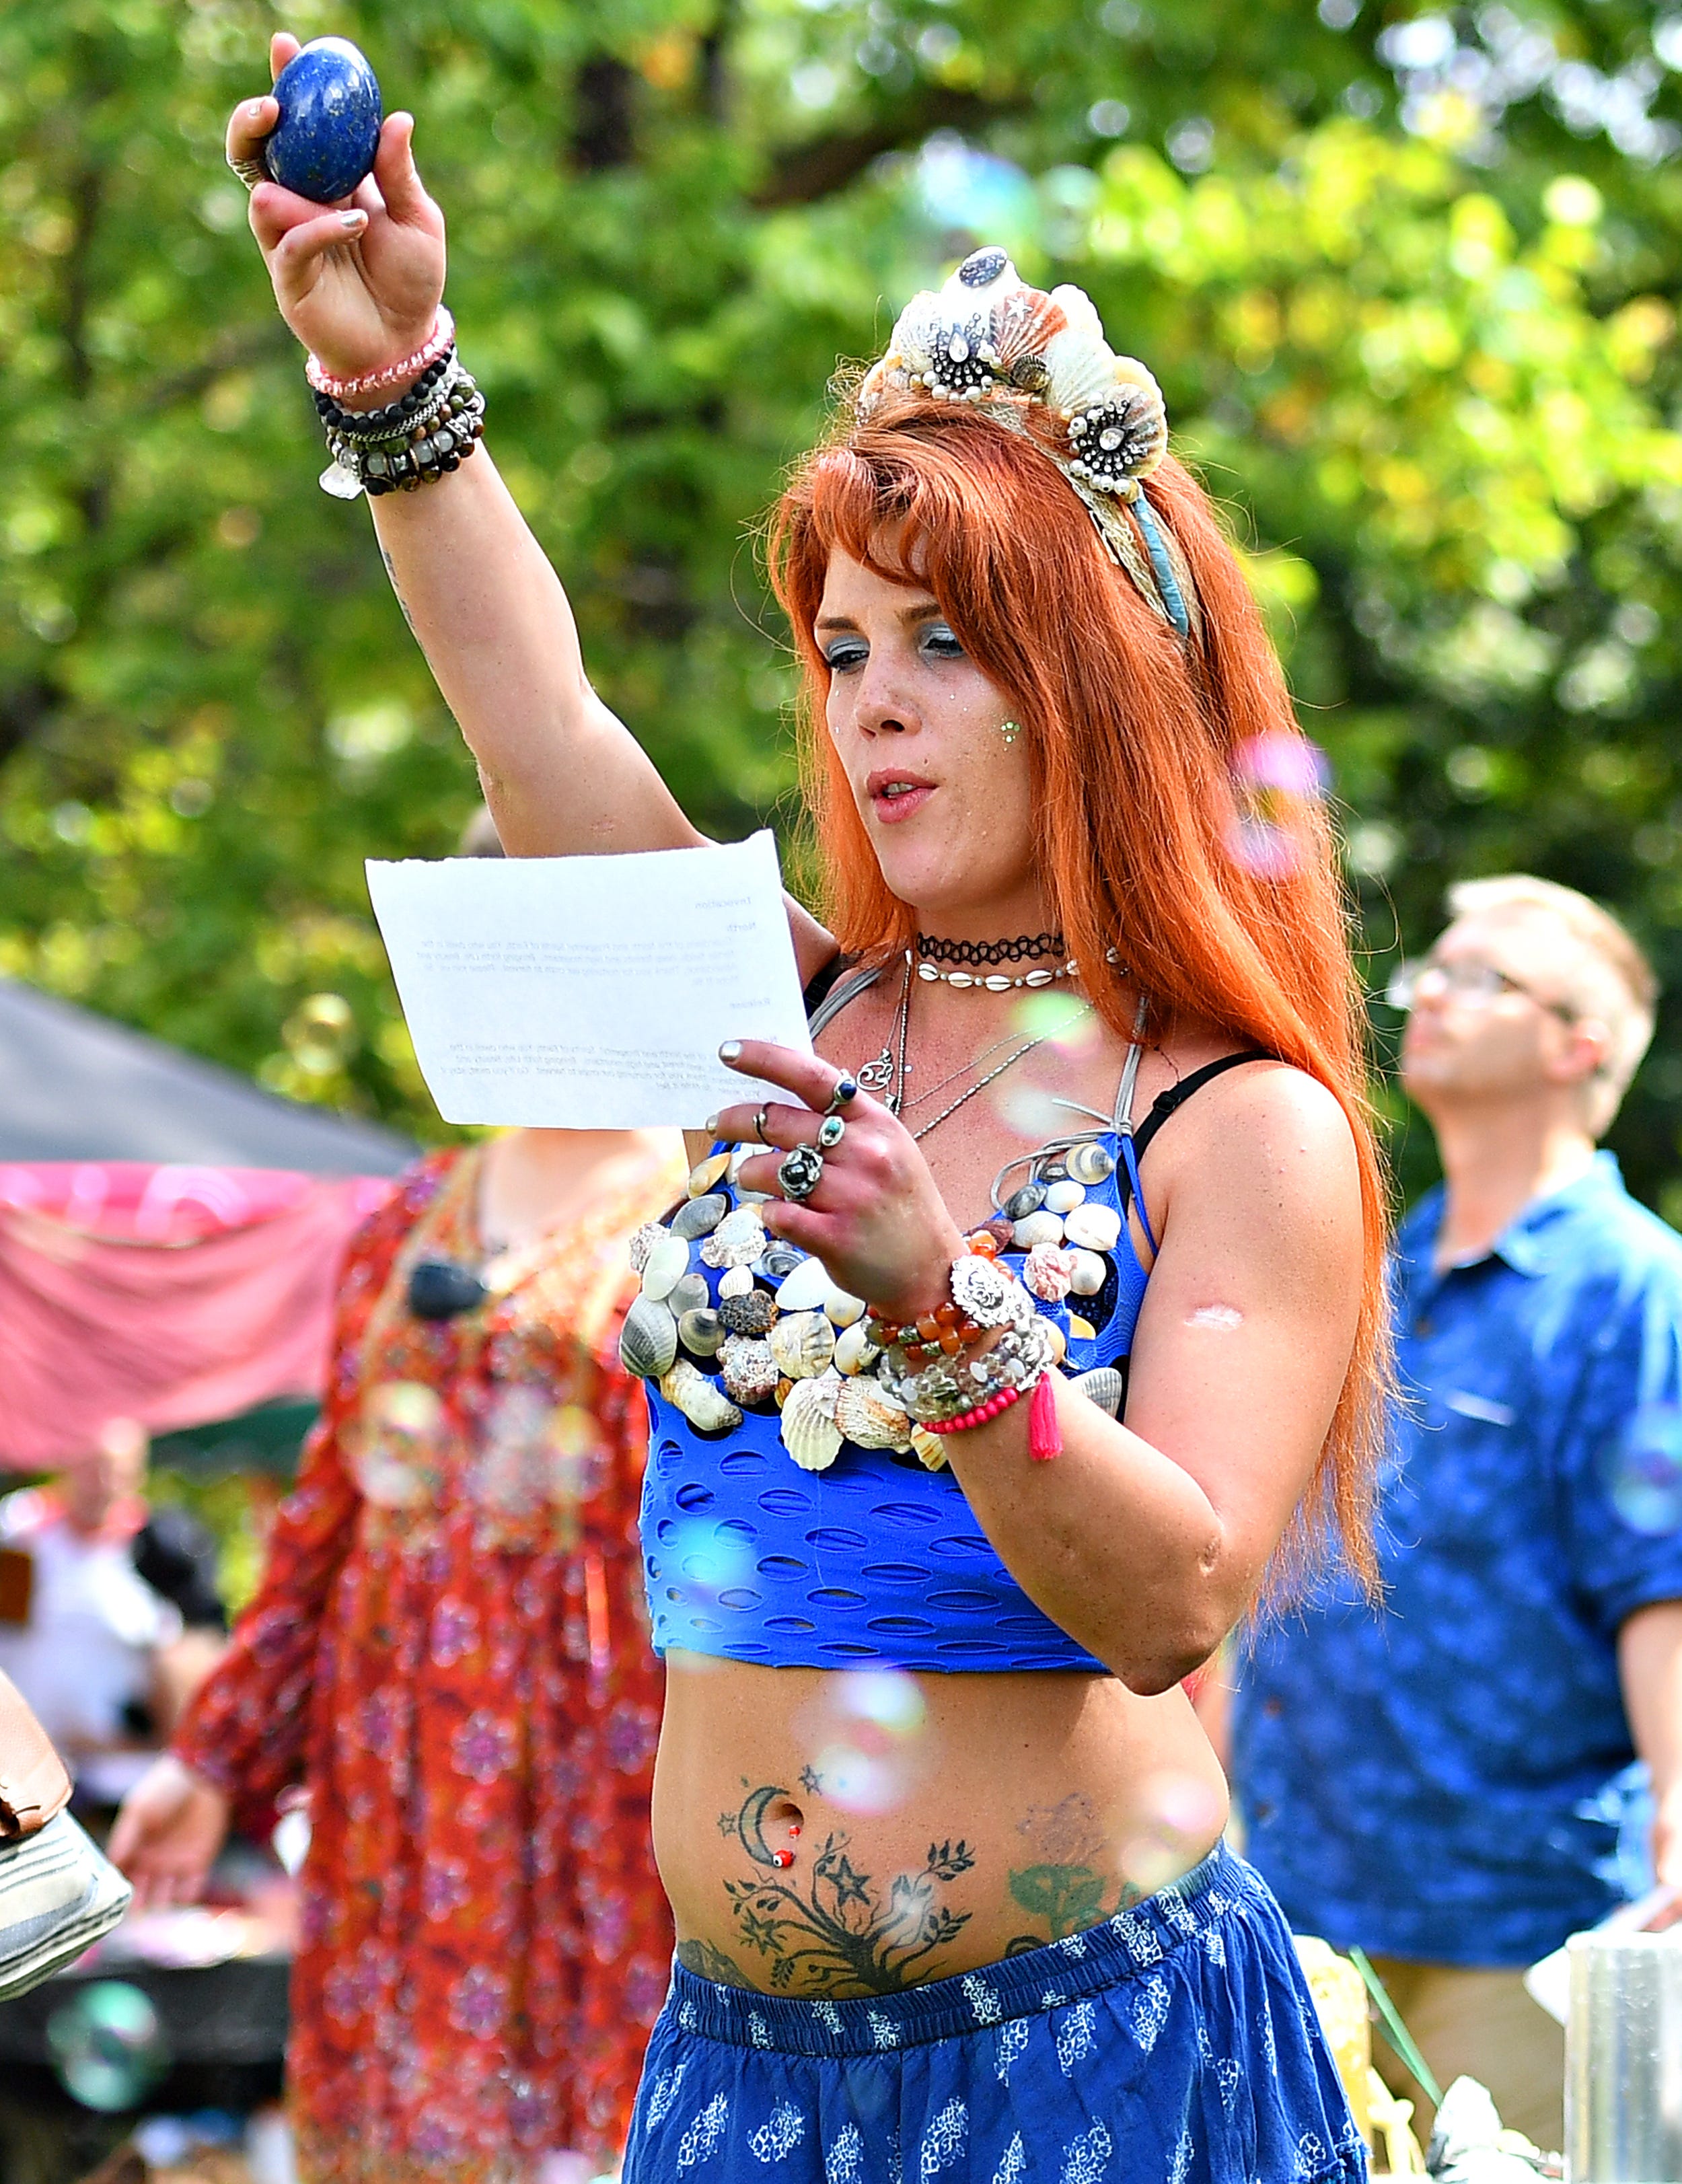 Laura Webster, of Dillsburg, speaks to one of the four elements as part of a harvest ritual, or blessing, during the 8th annual Pagan Pride Festival at Samuel S. Lewis State Park in Lower Windsor Township, Saturday, Sept. 28, 2019. Dawn J. Sagert photo